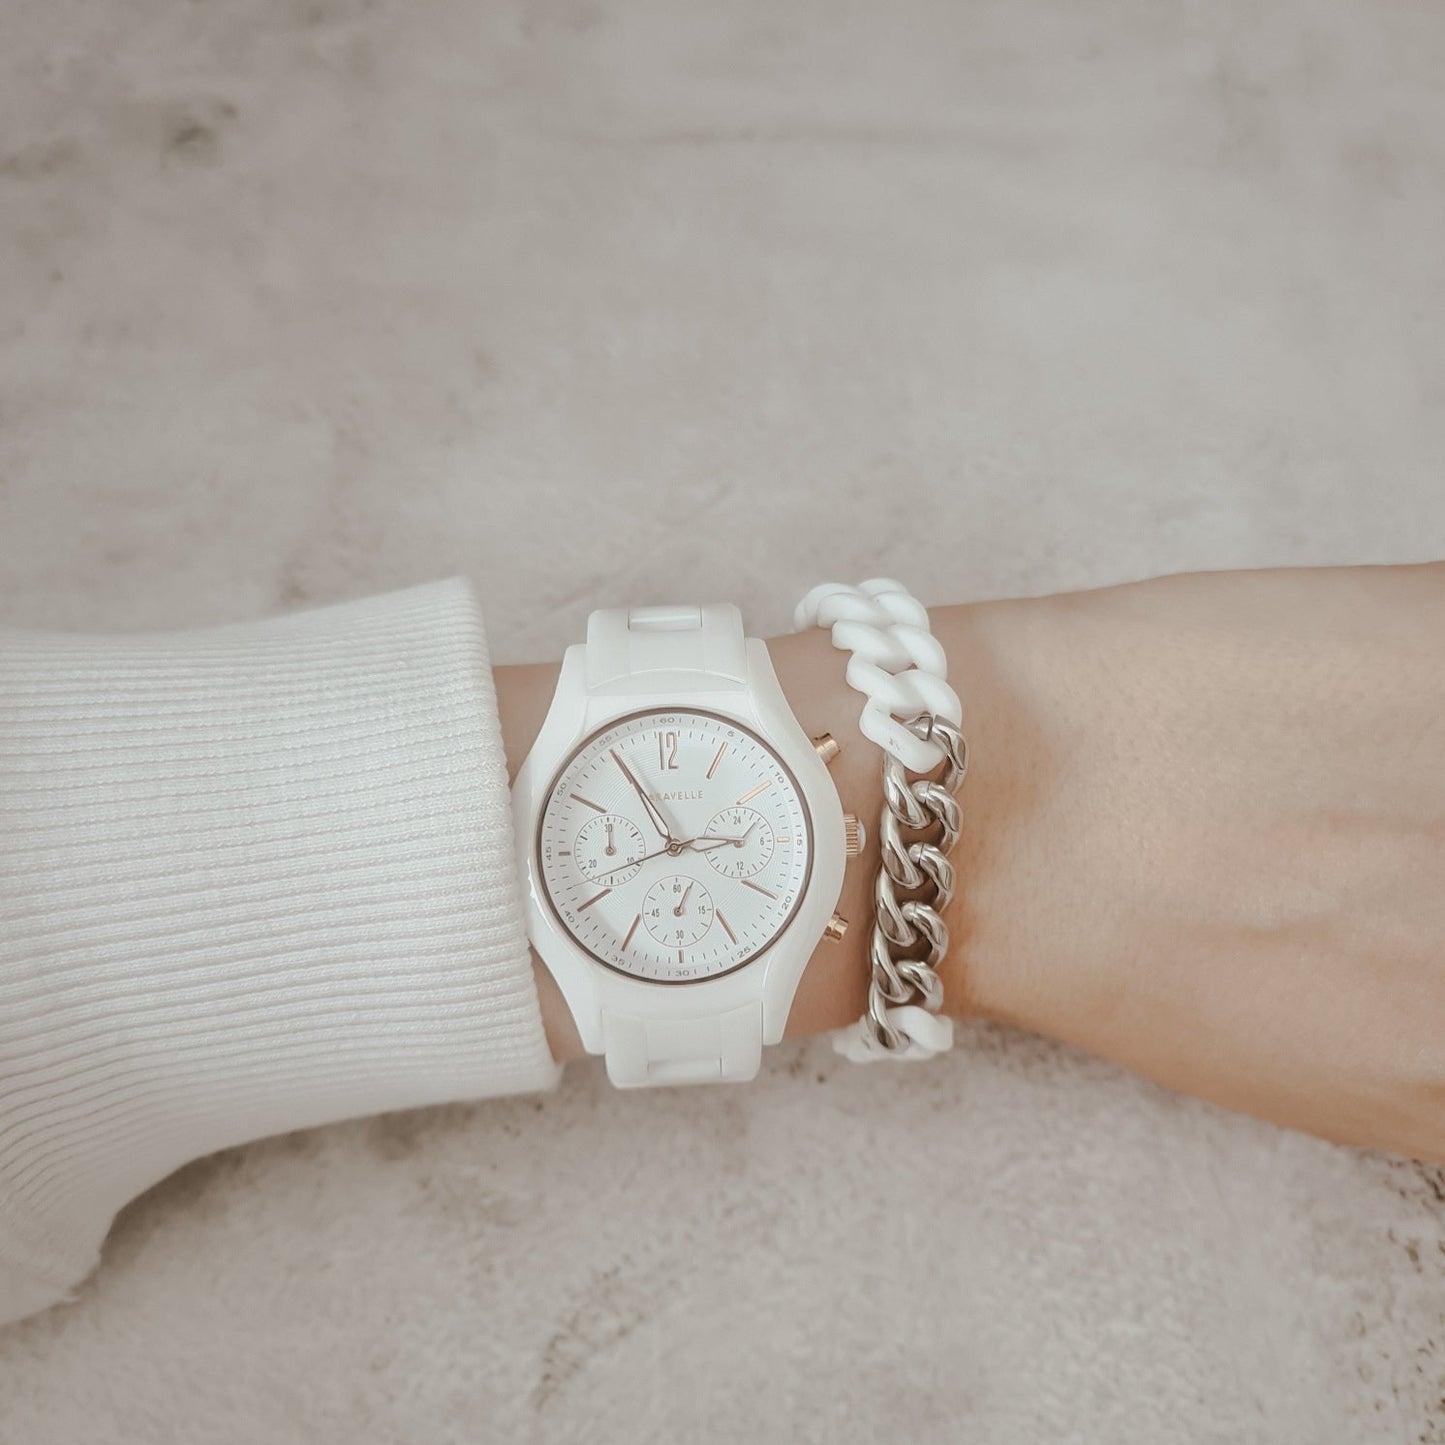 White and silver tone metal and silicone bracelet seen on woman's wrist